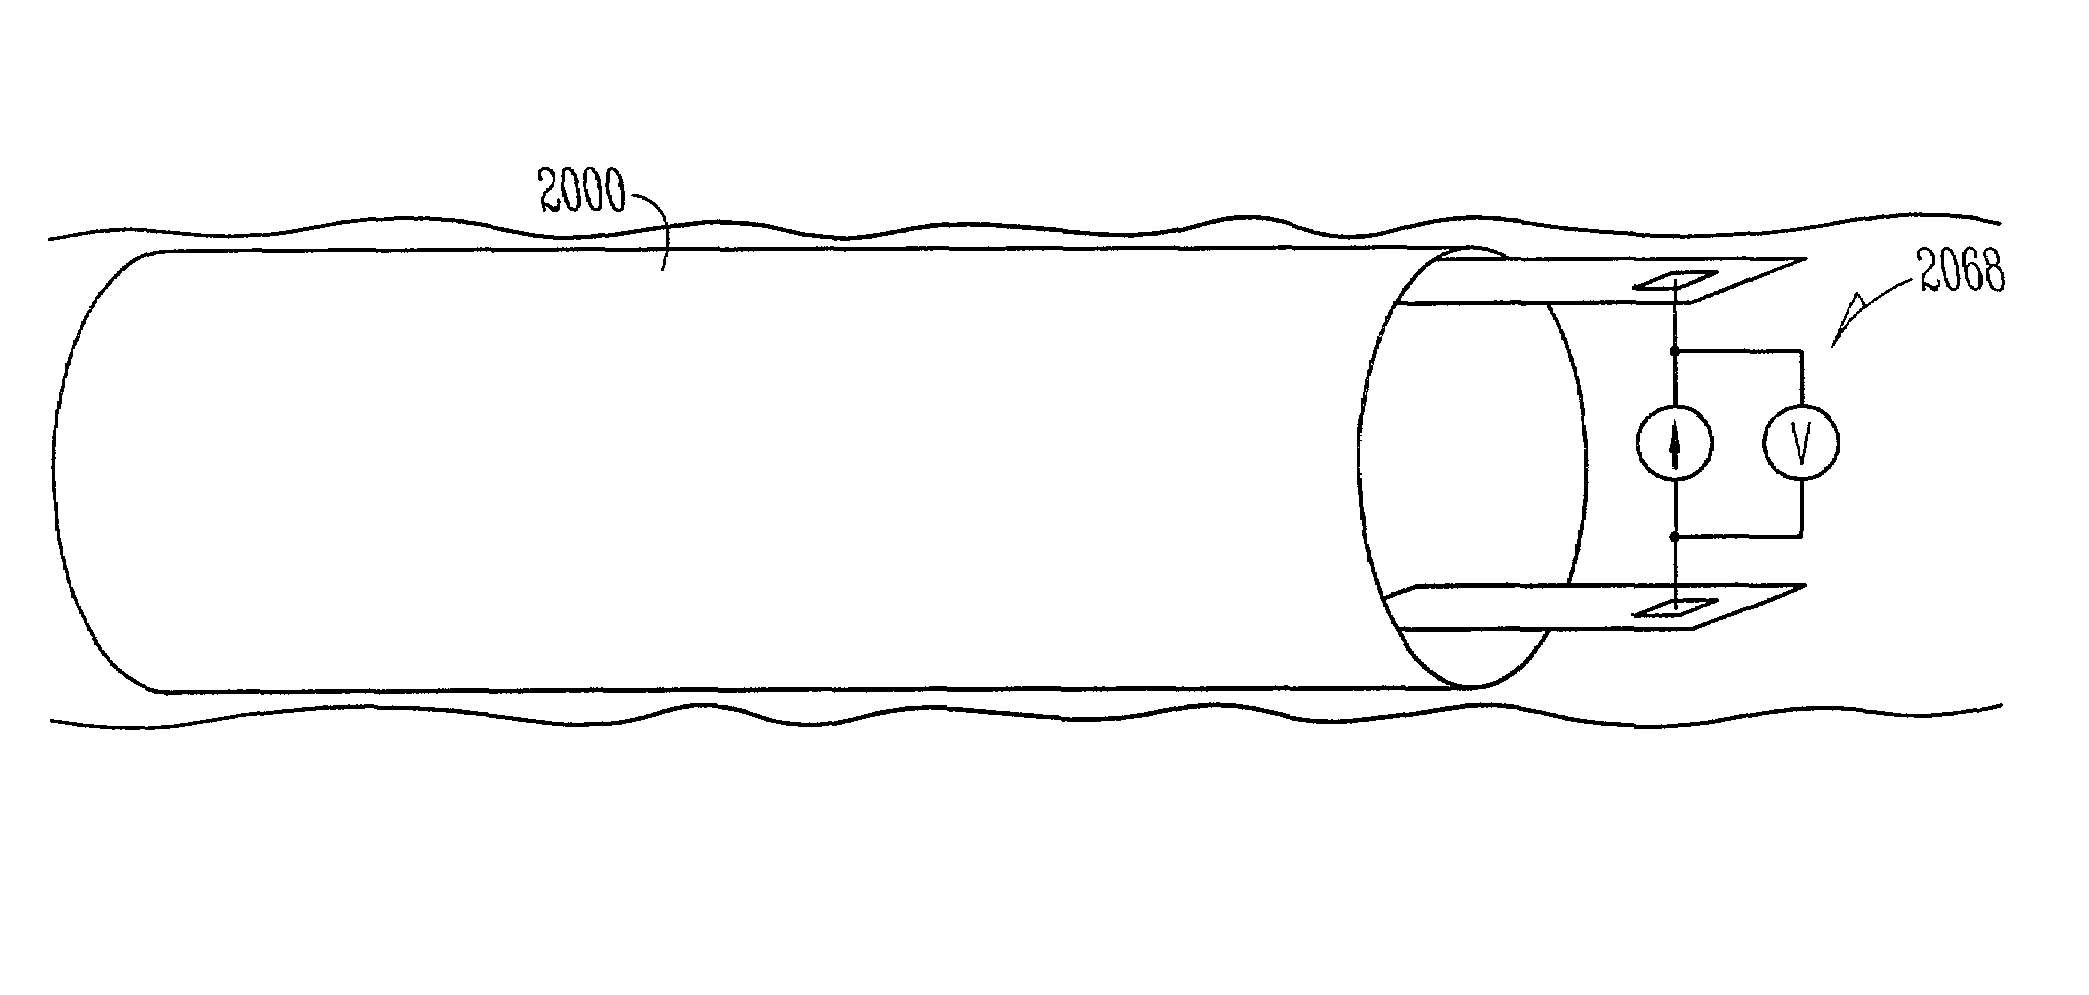 Chronically-implanted device for sensing and therapy